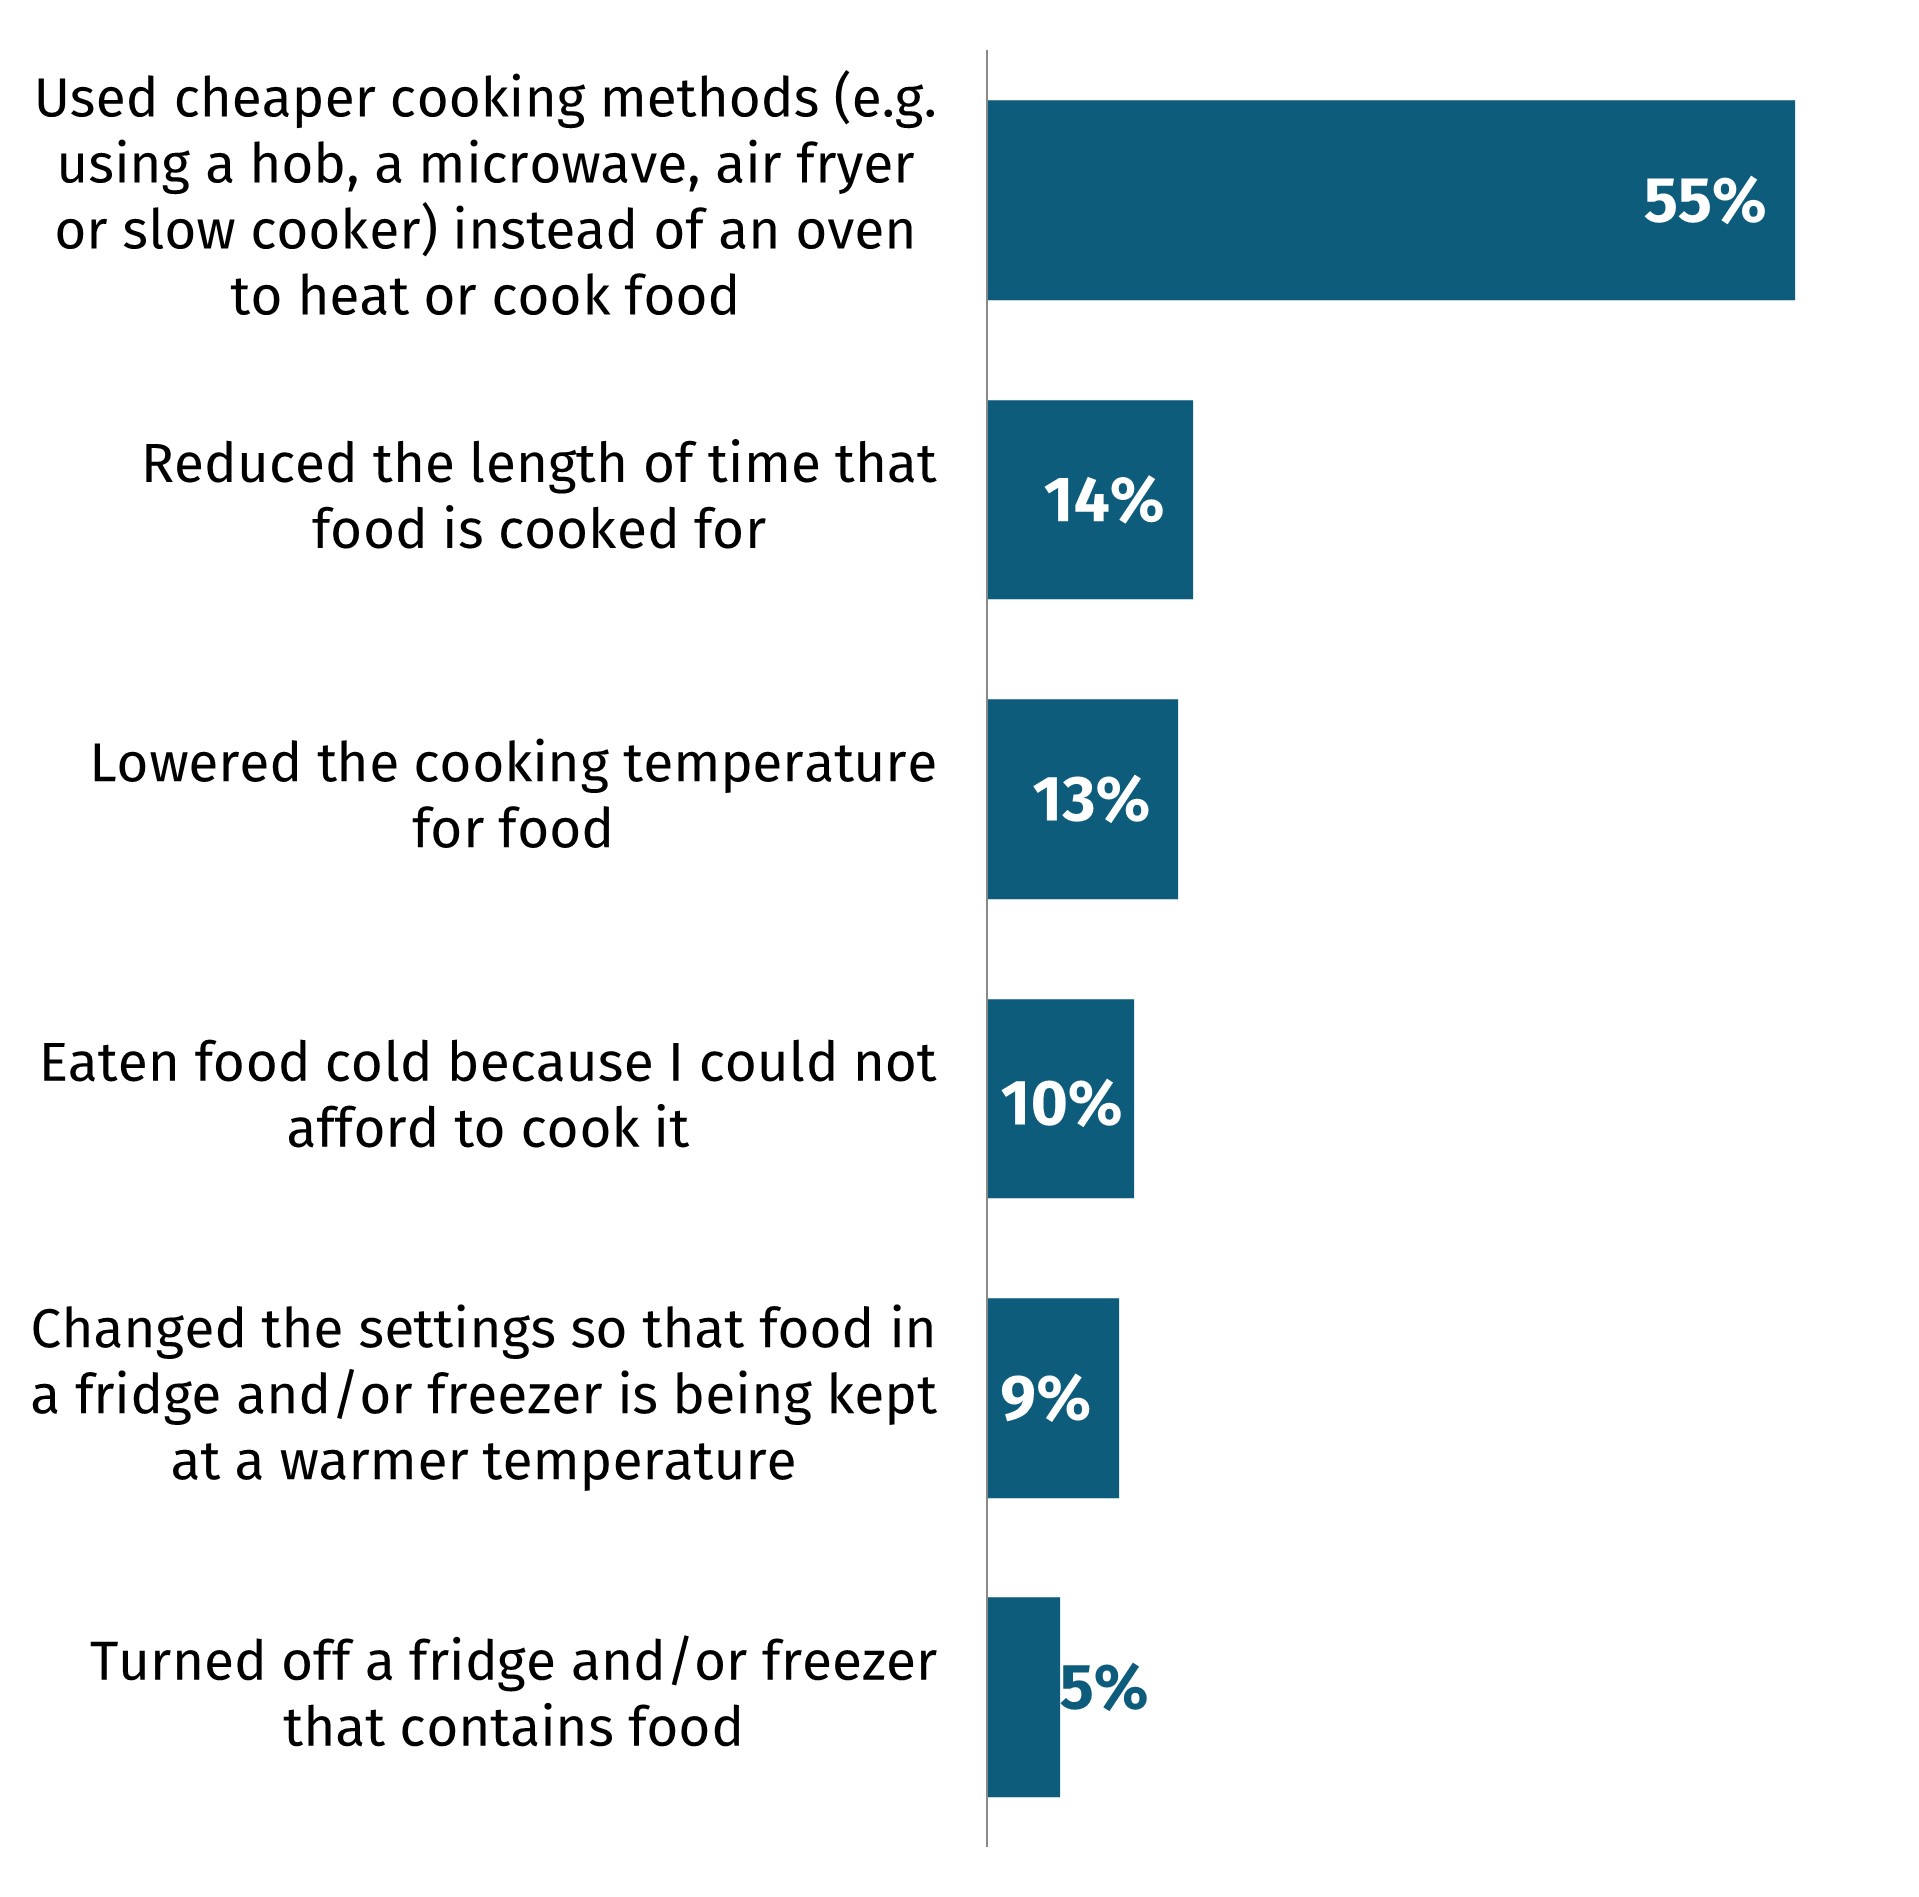 Used cheaper cooking methods 55% in September and 53% in August. Reduced the length of time that food is cooked for 14% in September and 12% in August.